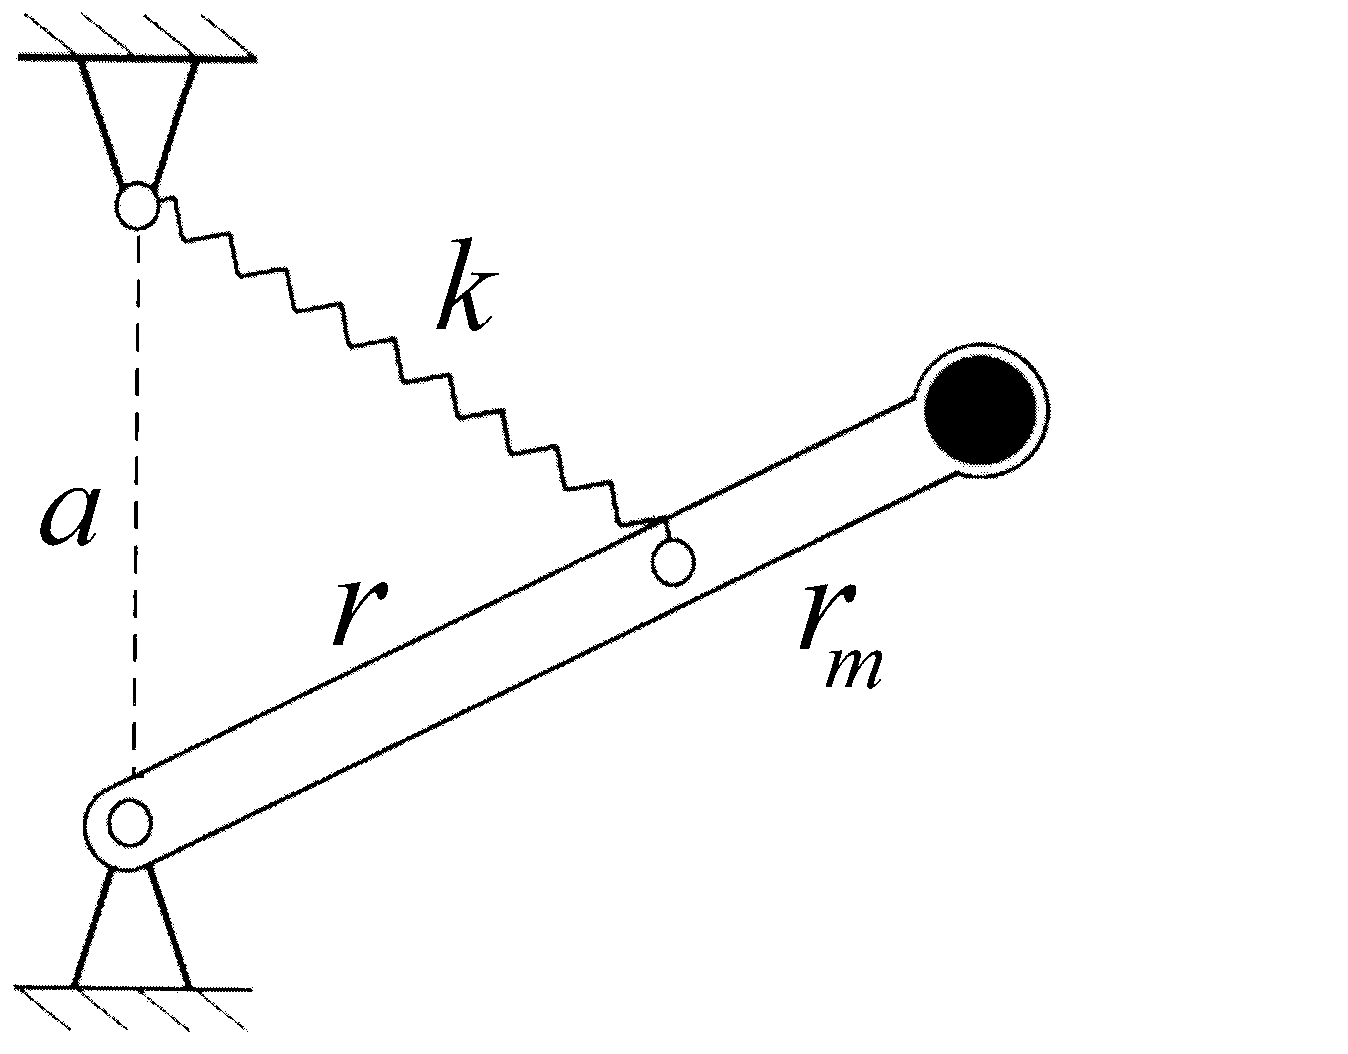 Gravity increase technology based on spring mechanism